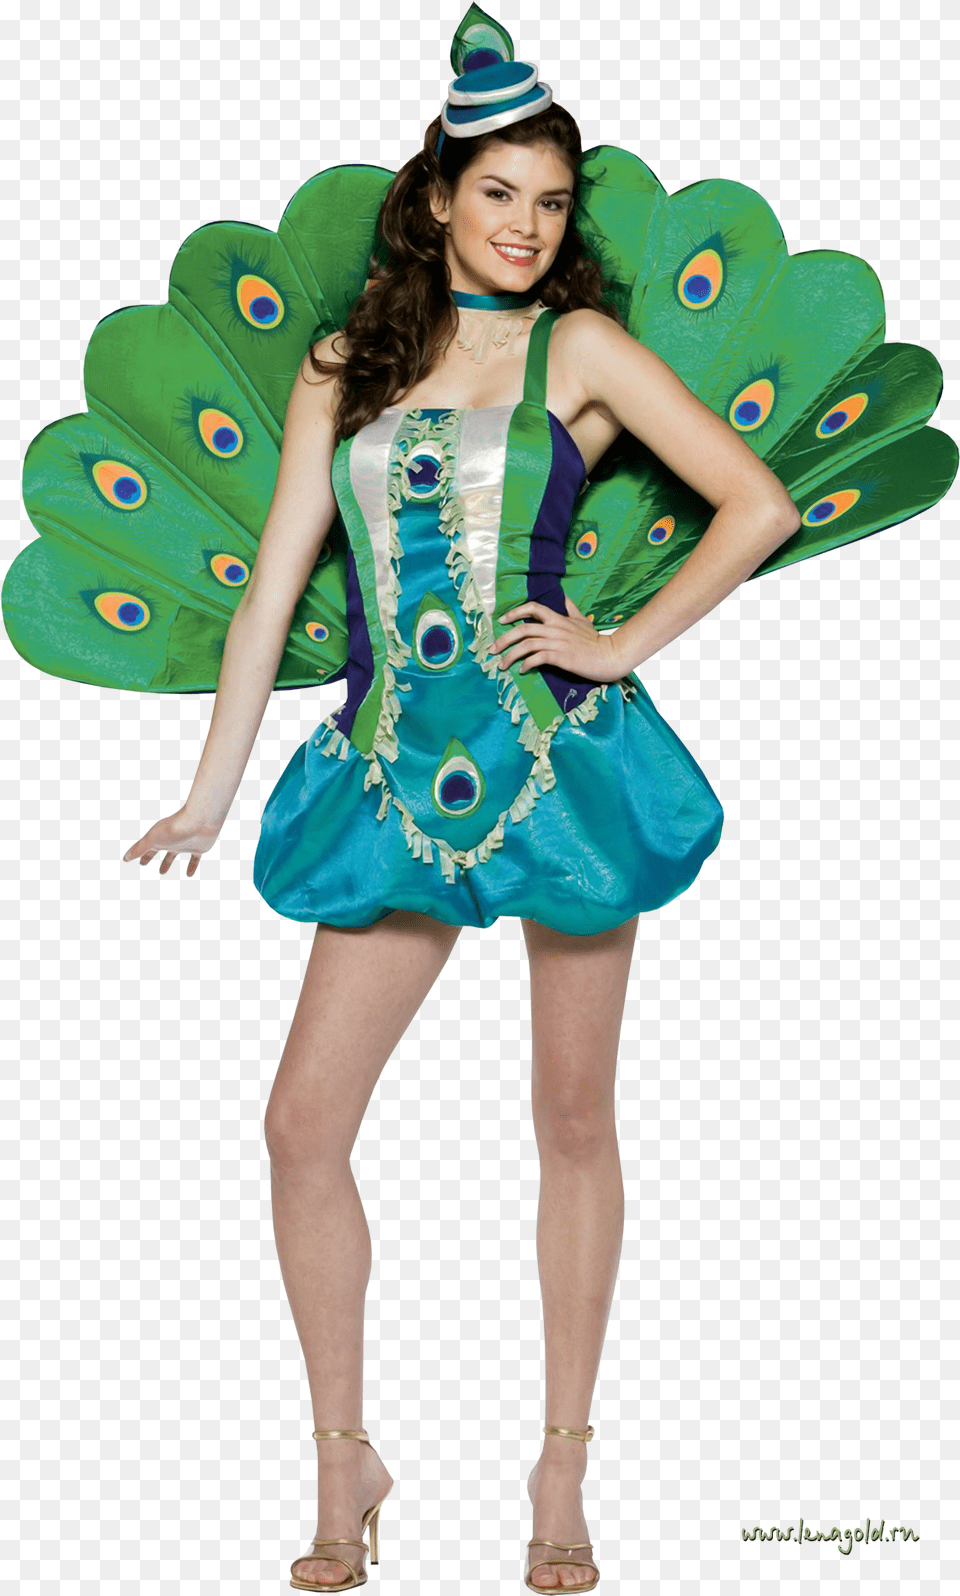 Girlpng Cool Halloween Costumes 2017 For Girls Teen Teenage Cute Girl Costumes, Person, Clothing, Costume, Dress Free Transparent Png